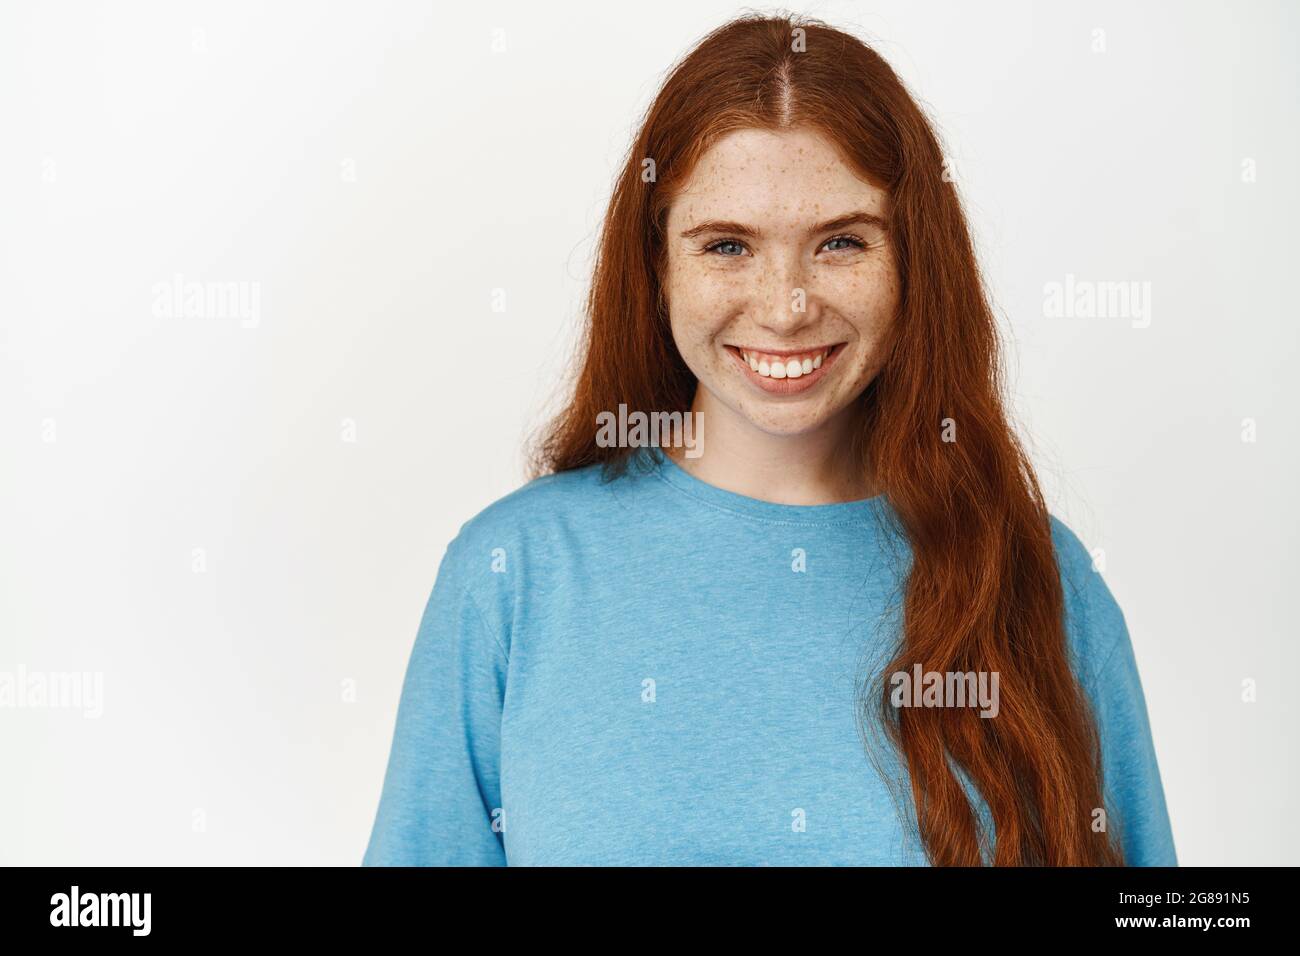 Women beauty. Close up shot of smiling natural girl with long red hair, candid white smile, pale skin and freckles, looking happy at camera, standing Stock Photo